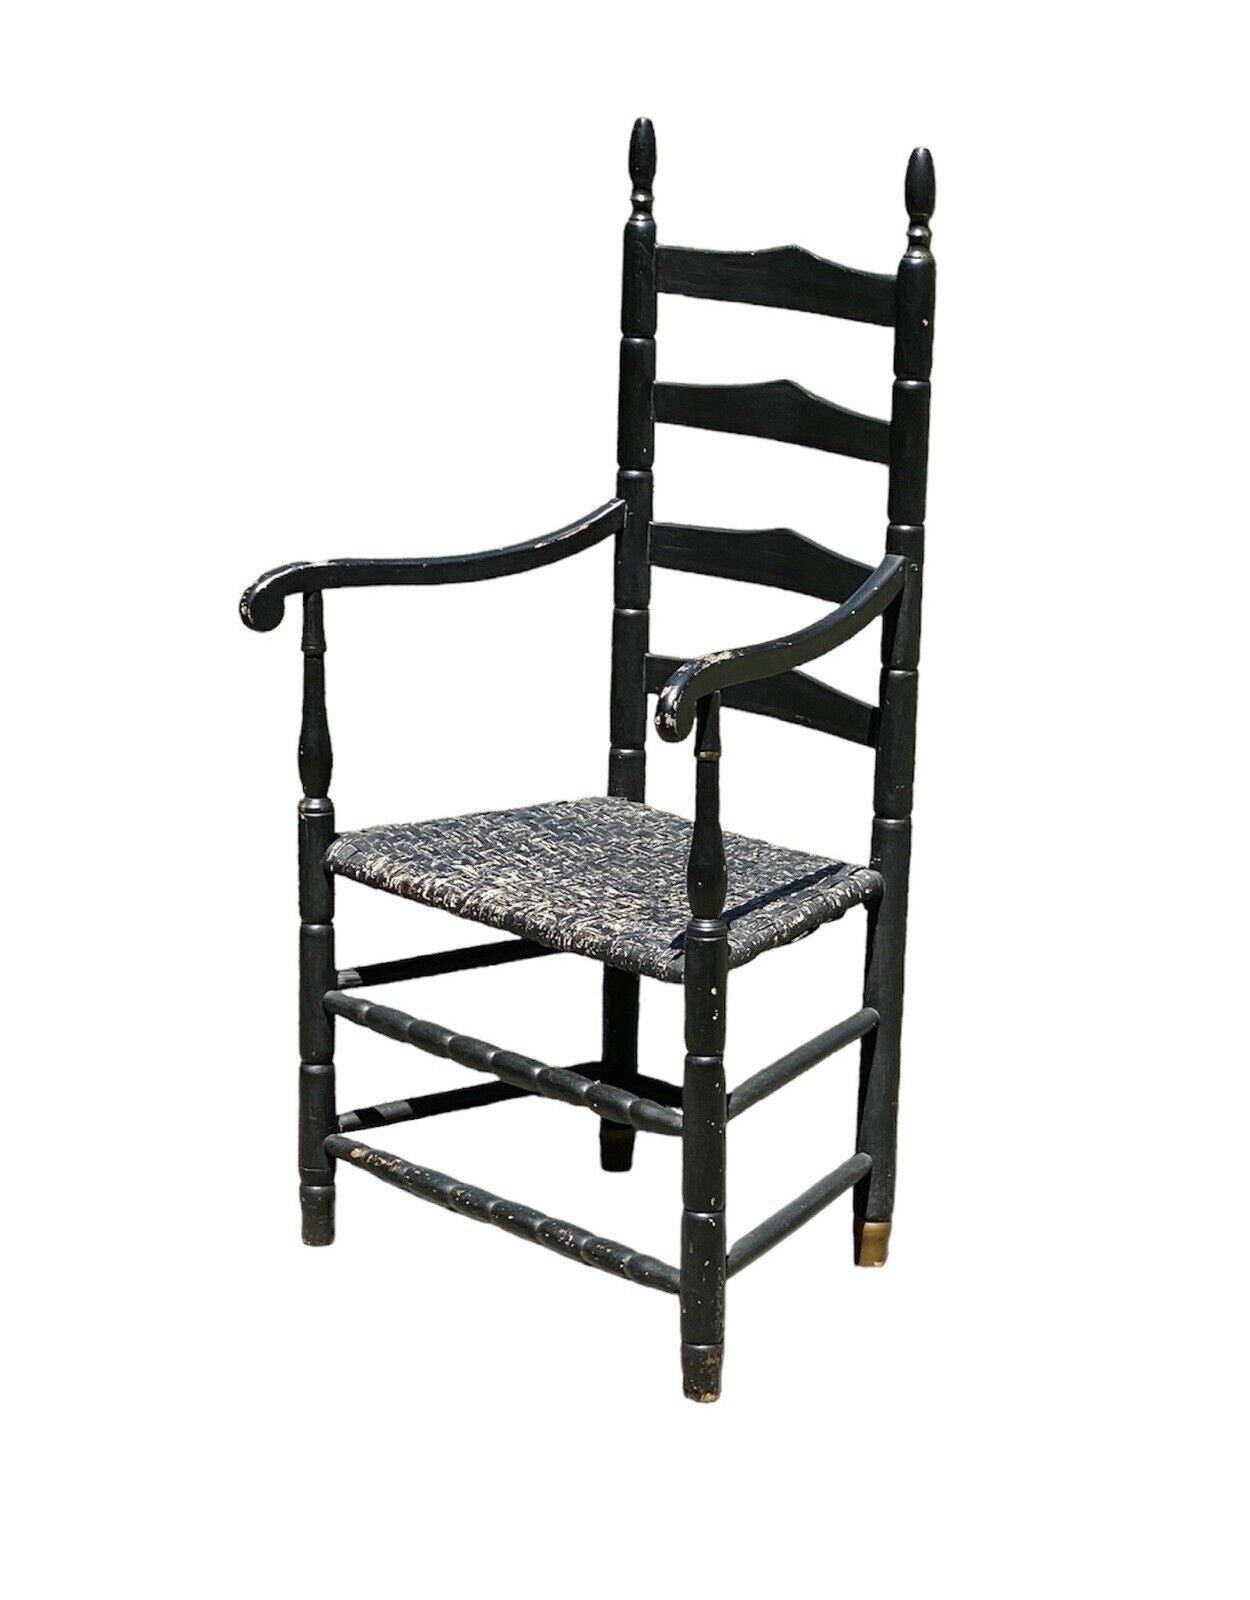 18th Century Antique Queen Anne Ladderback Chair in Black With Ram's Head Arms